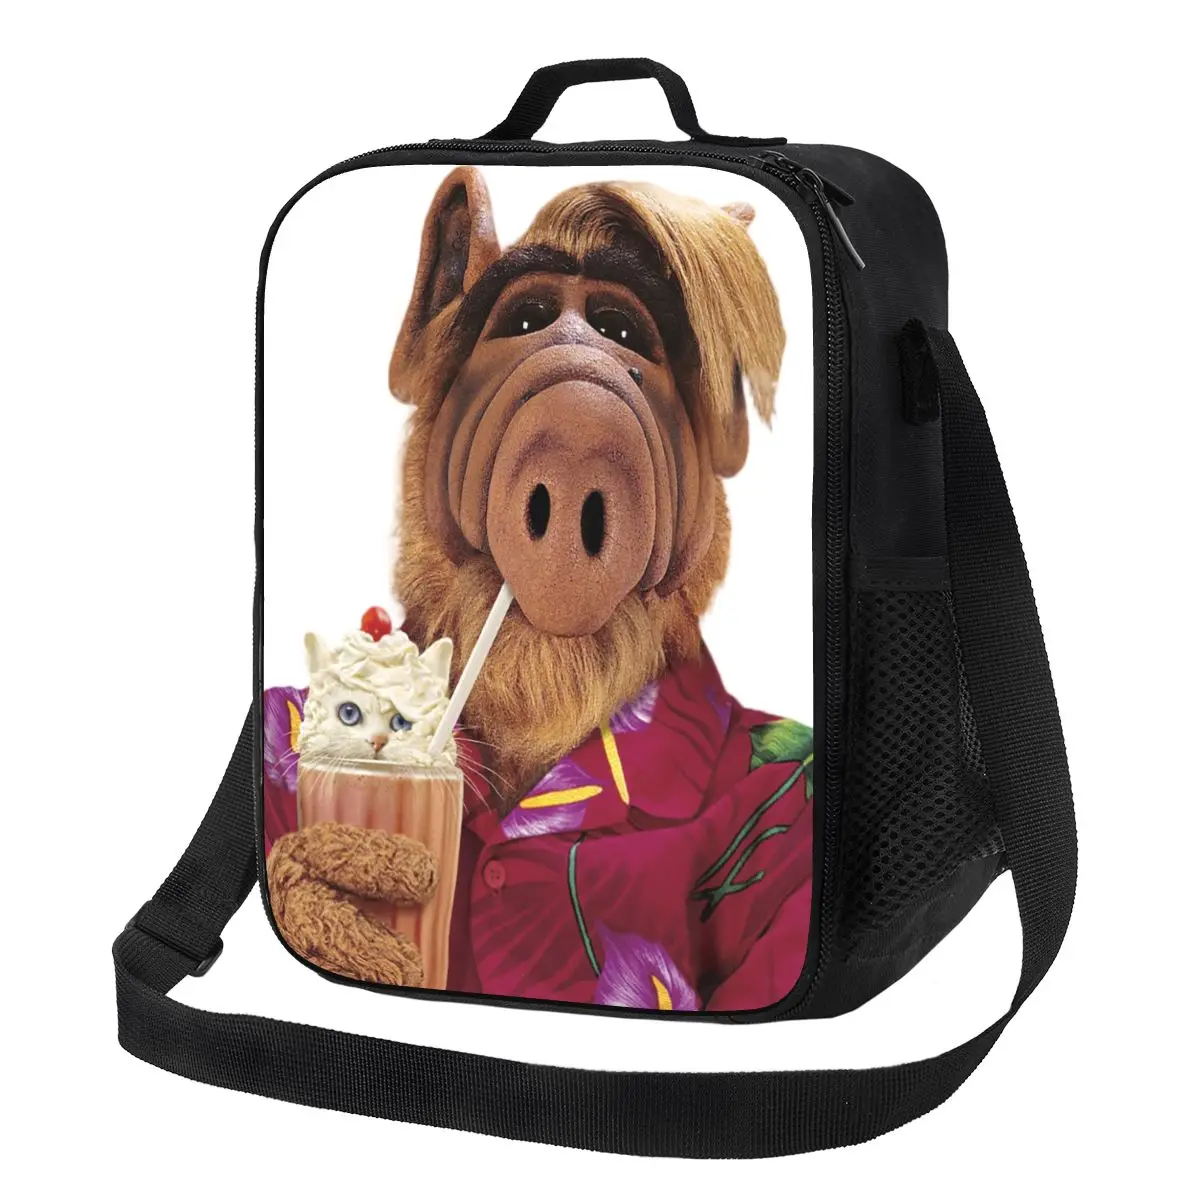 

Funny Alf Meme Insulated Lunch Bag for Women Alien Life Form Sci Fi Tv Show Cooler Thermal Lunch Tote Office Picnic Travel